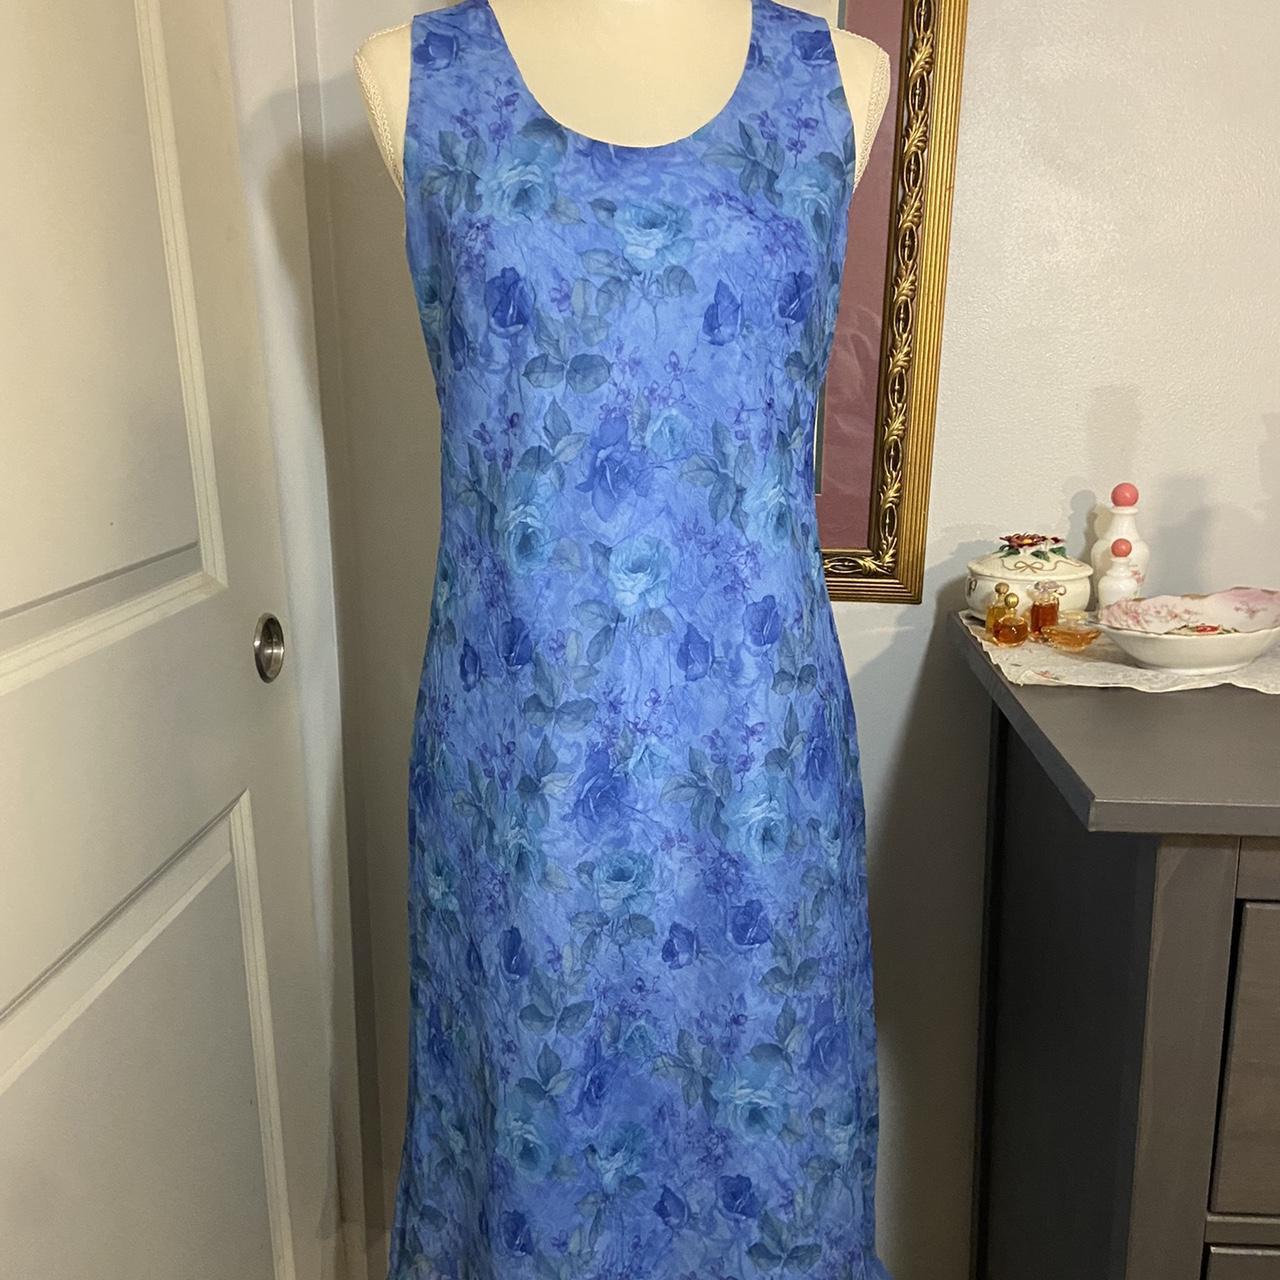 K & Company y2k Blue Floral Dress This is a... - Depop